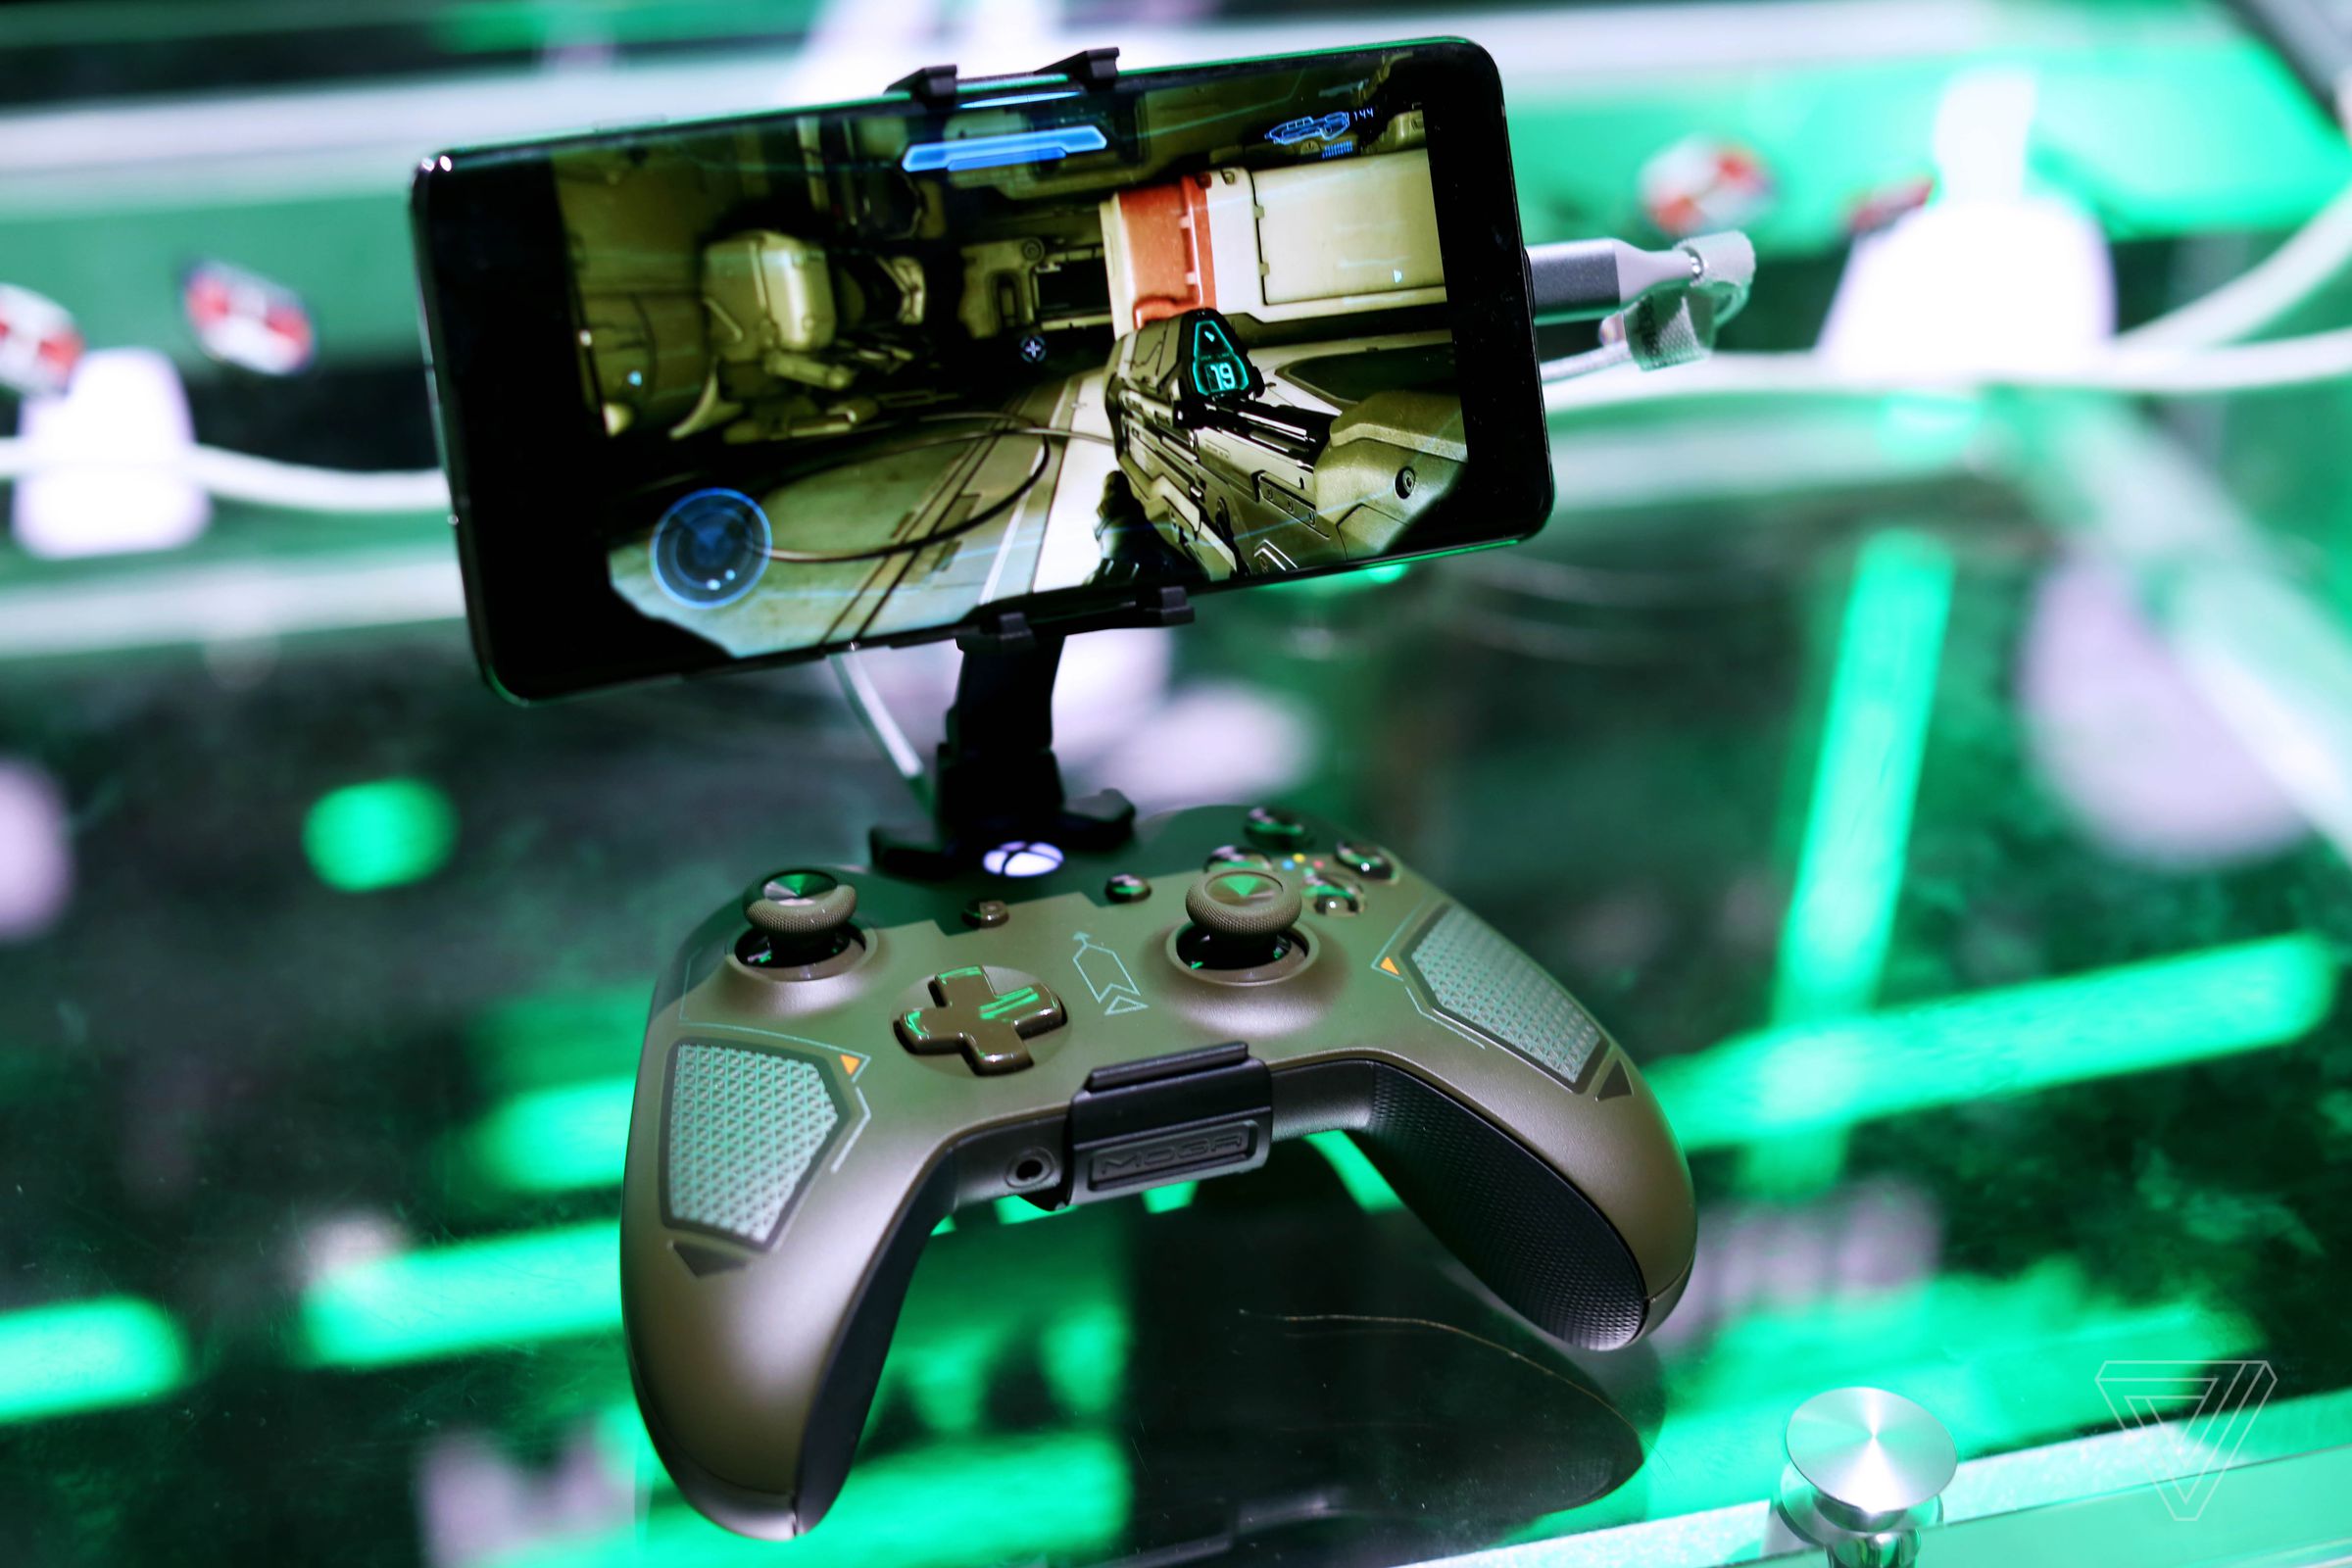 Microsoft’s xCloud will lets you play games like Halo on a phone via the cloud — but not if it’s an iPhone.